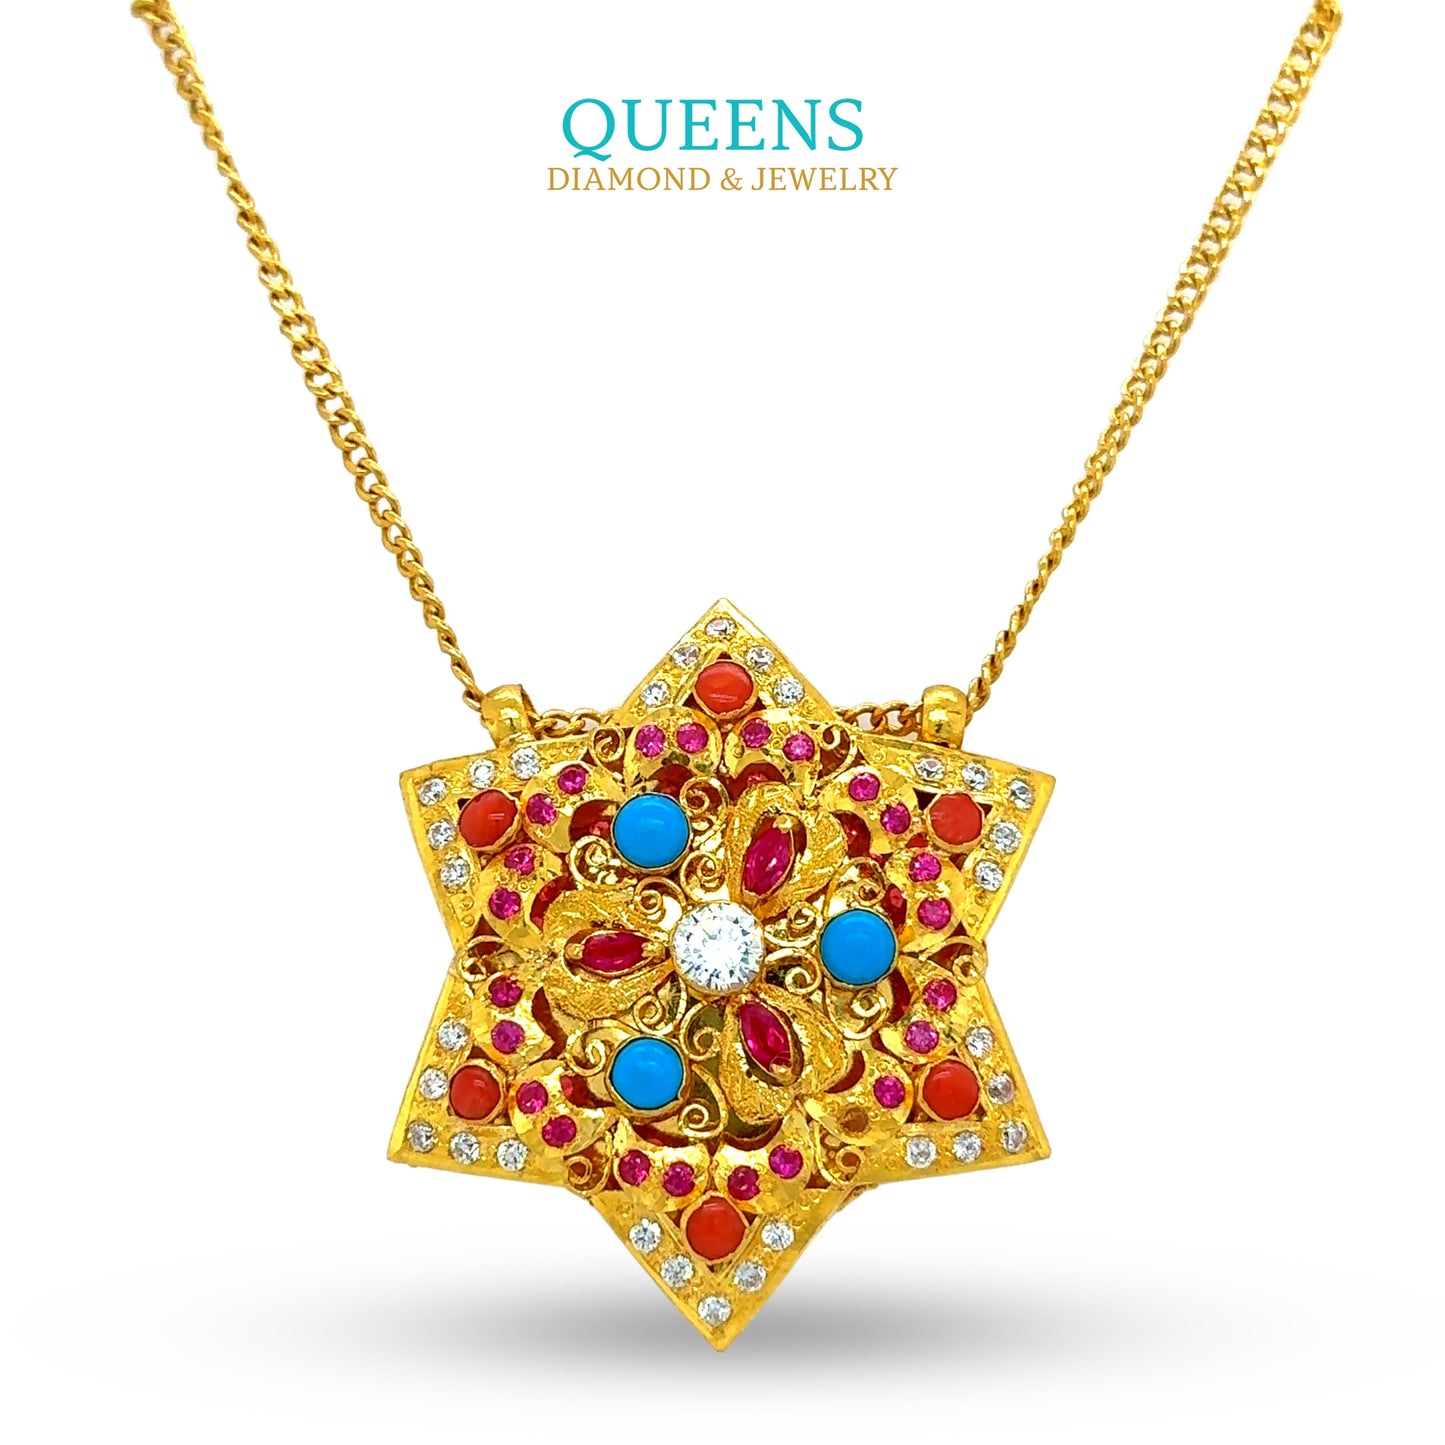 24KT Gold, Handmade Small Ghau with Coral, Turquoise & CZ Stones